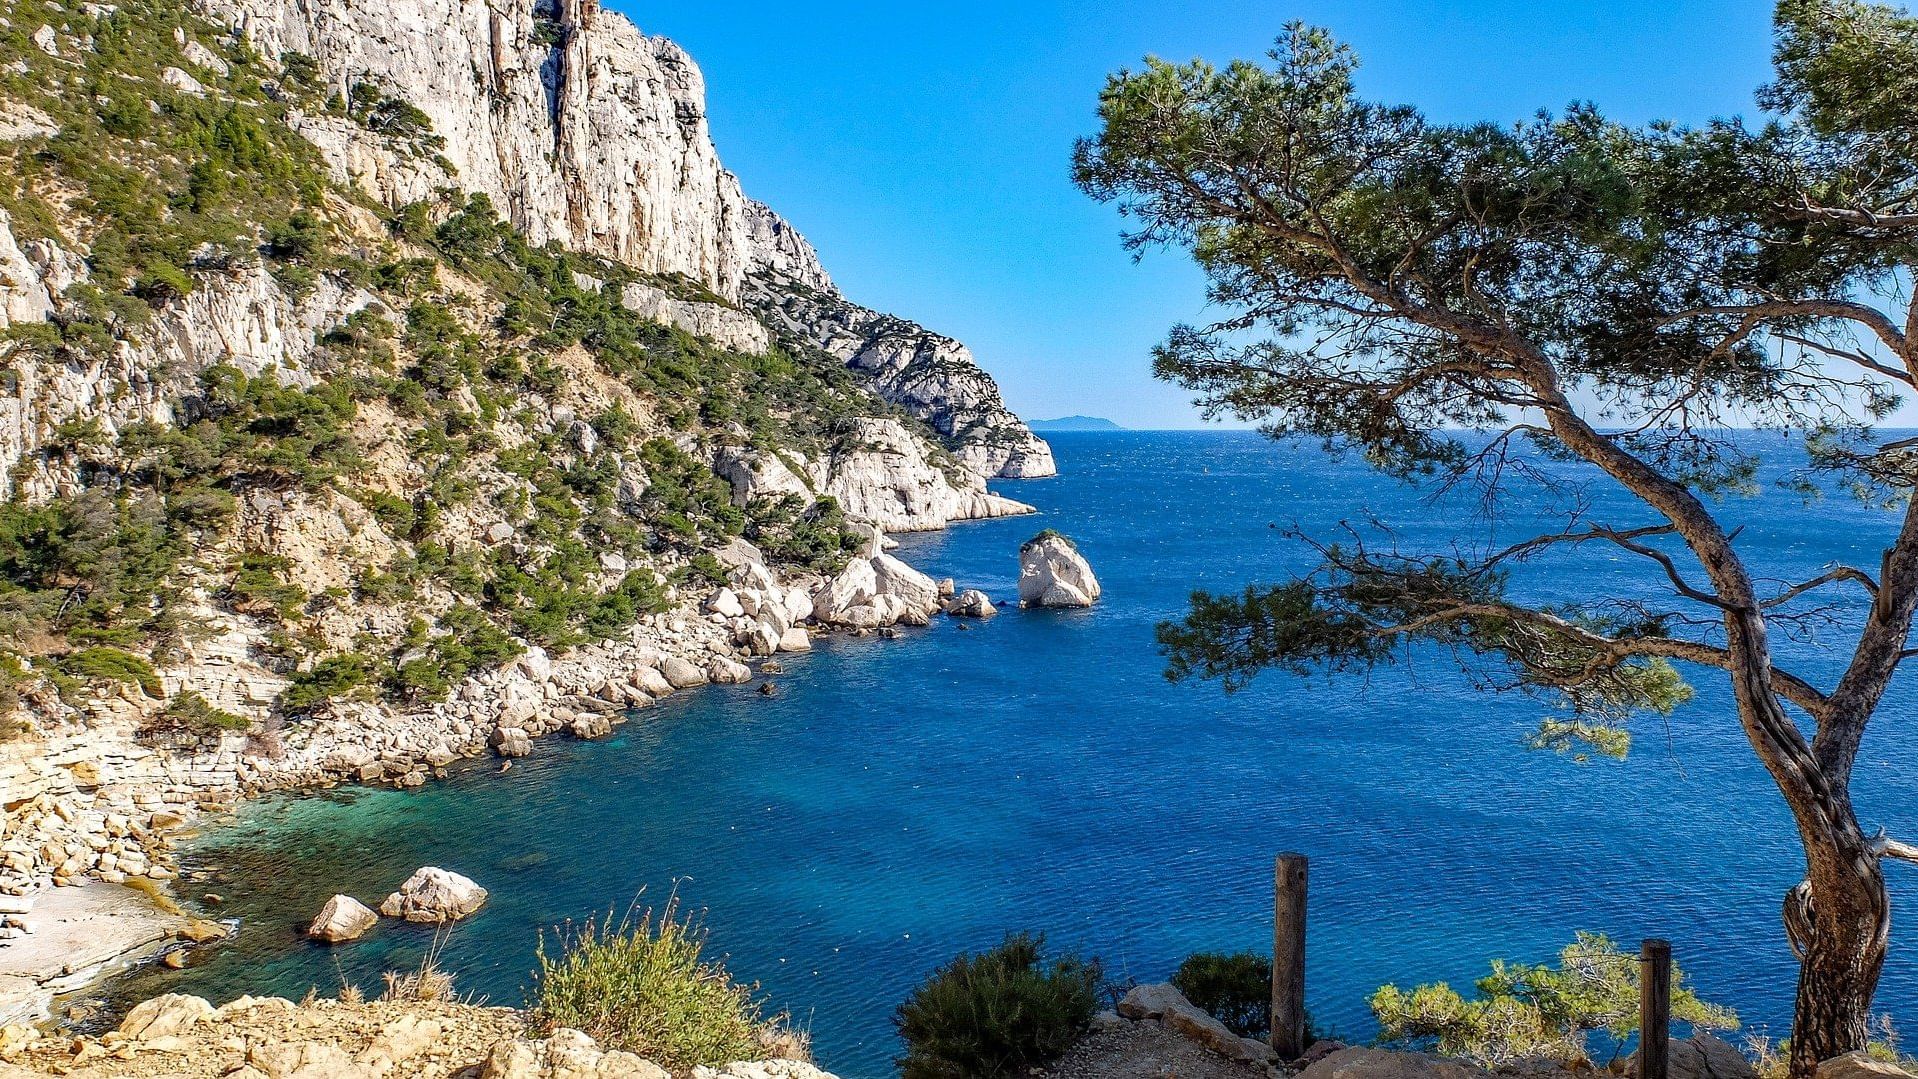 Calanques national park by the sea near Originals Hotels